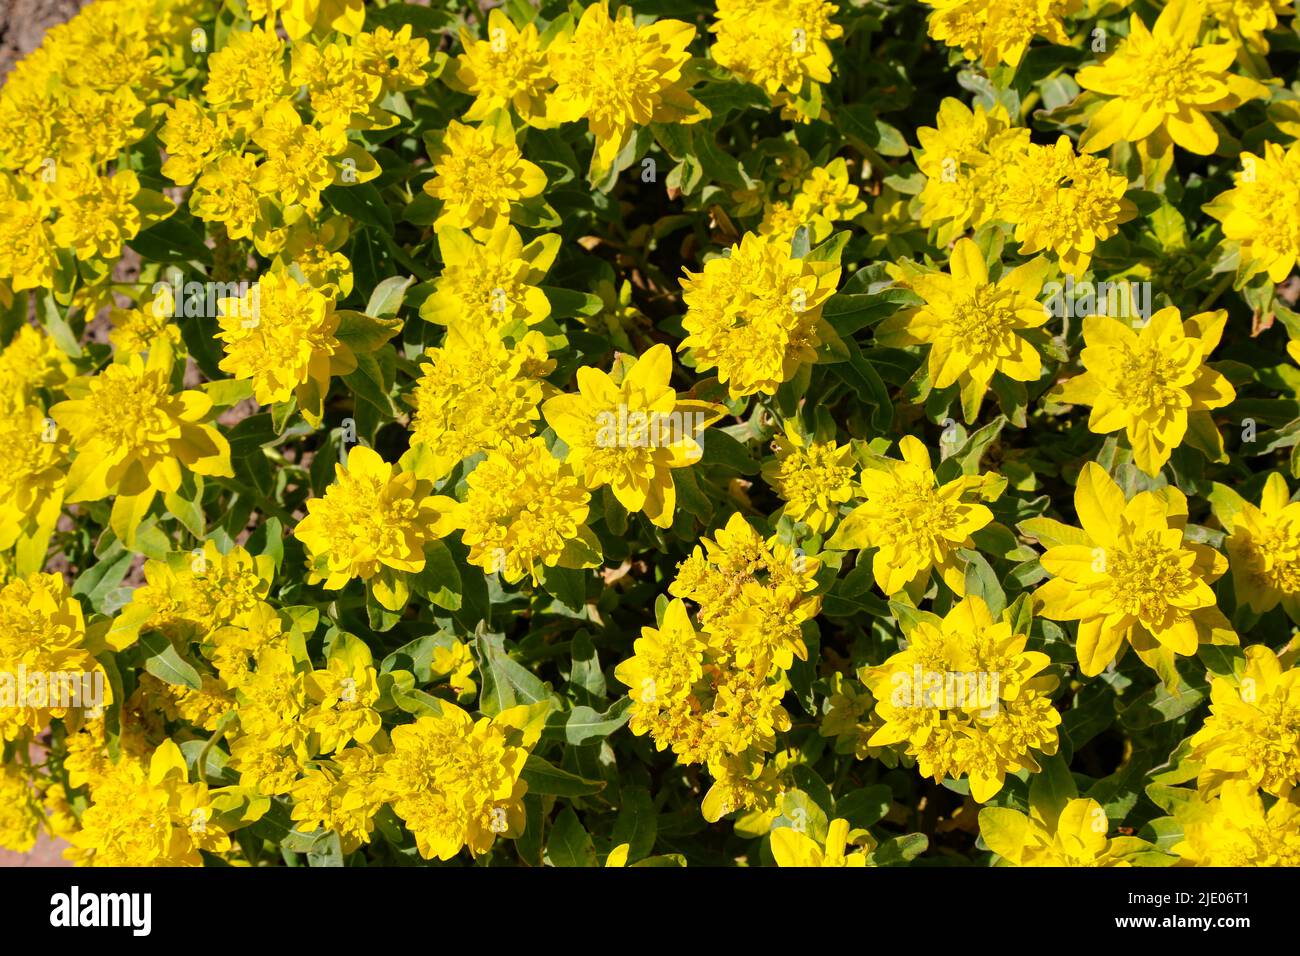 Golden spurge (Euphorbia polychroma) in the Rose Garden Ulm, garden, flower beds, park, yellow flowers, flowers, ground cover, spring bloomers Stock Photo